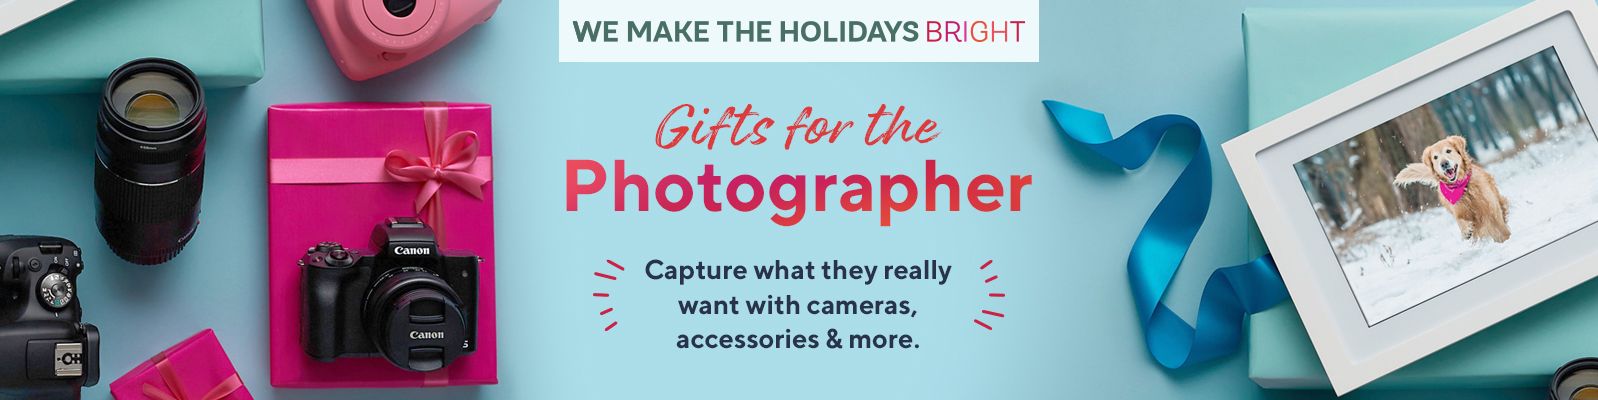 We Make The Holidays Bright - Gifts for the Photographer - Capture what they really want with cameras, accessories & more.